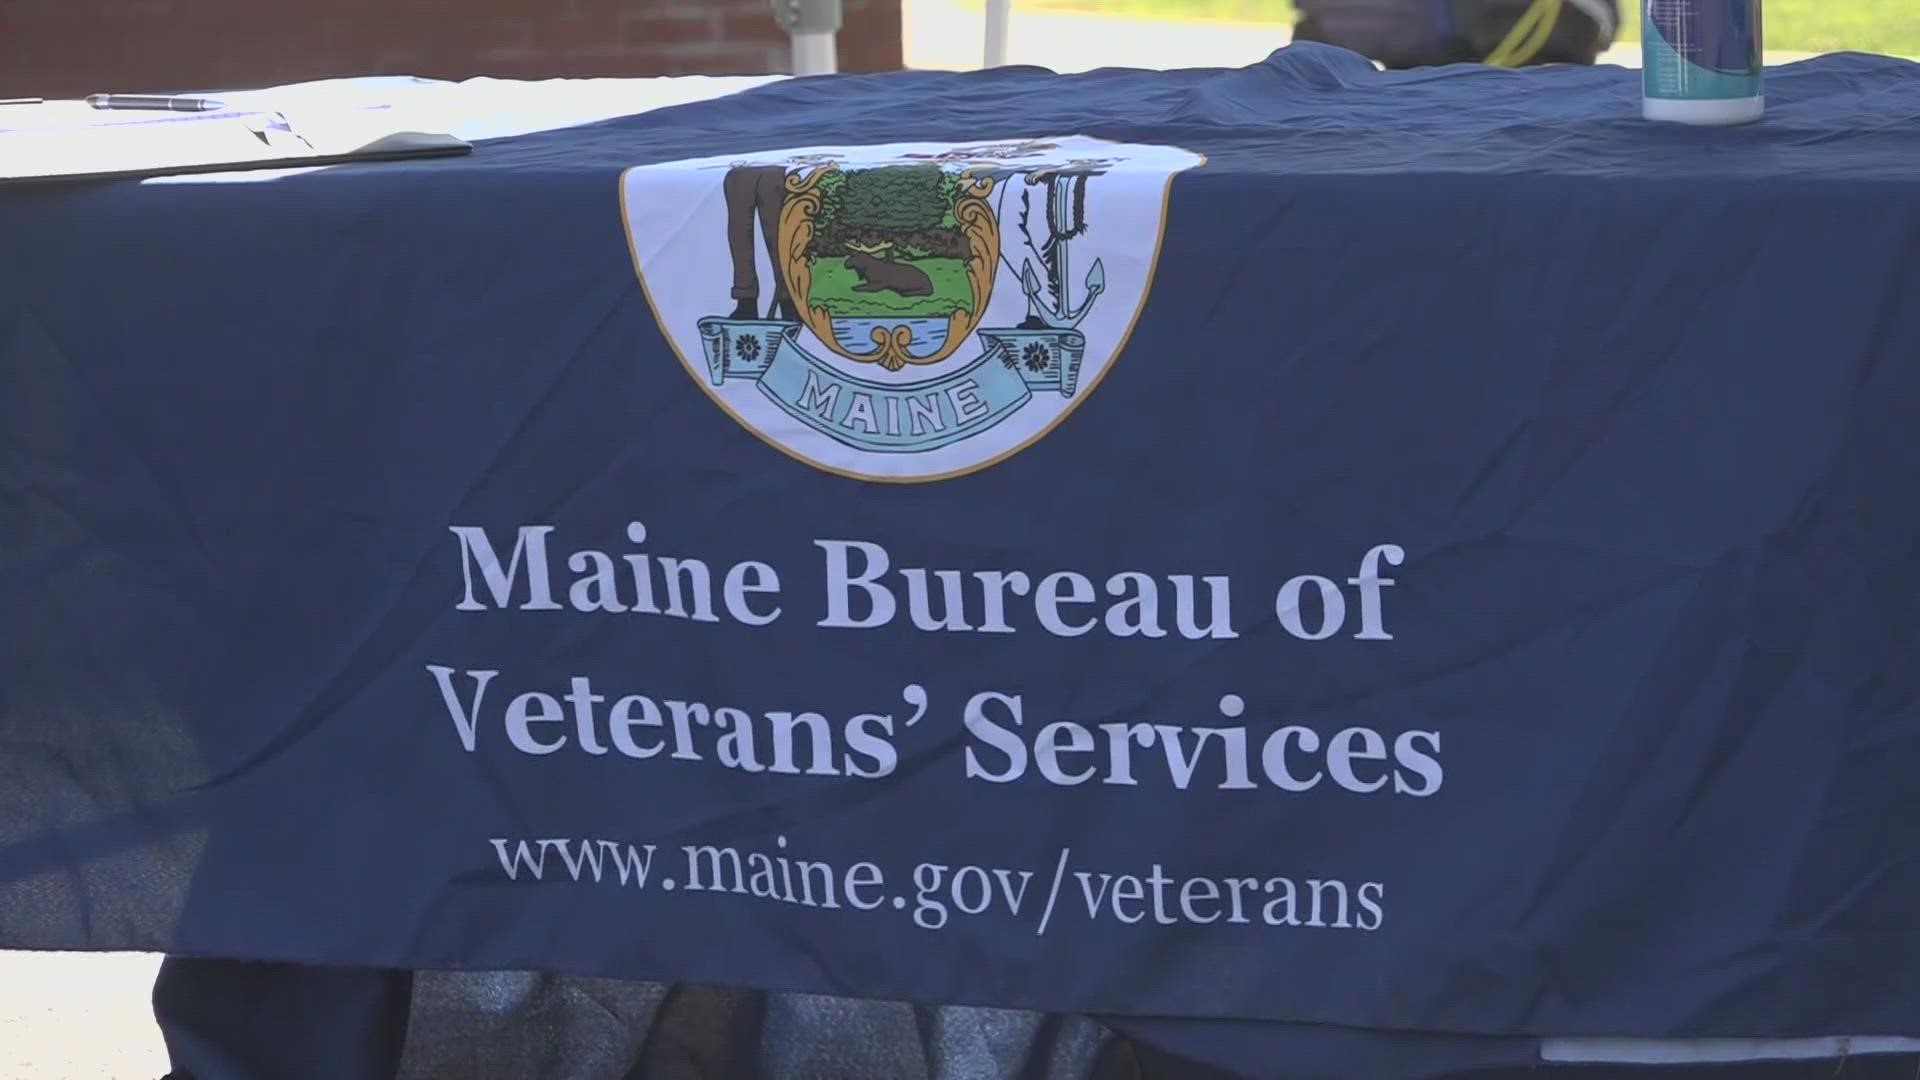 The event provides an opportunity for homeless veterans to find temporary housing, as well as resources for healthcare, finances, Covid-19 vaccines and more.